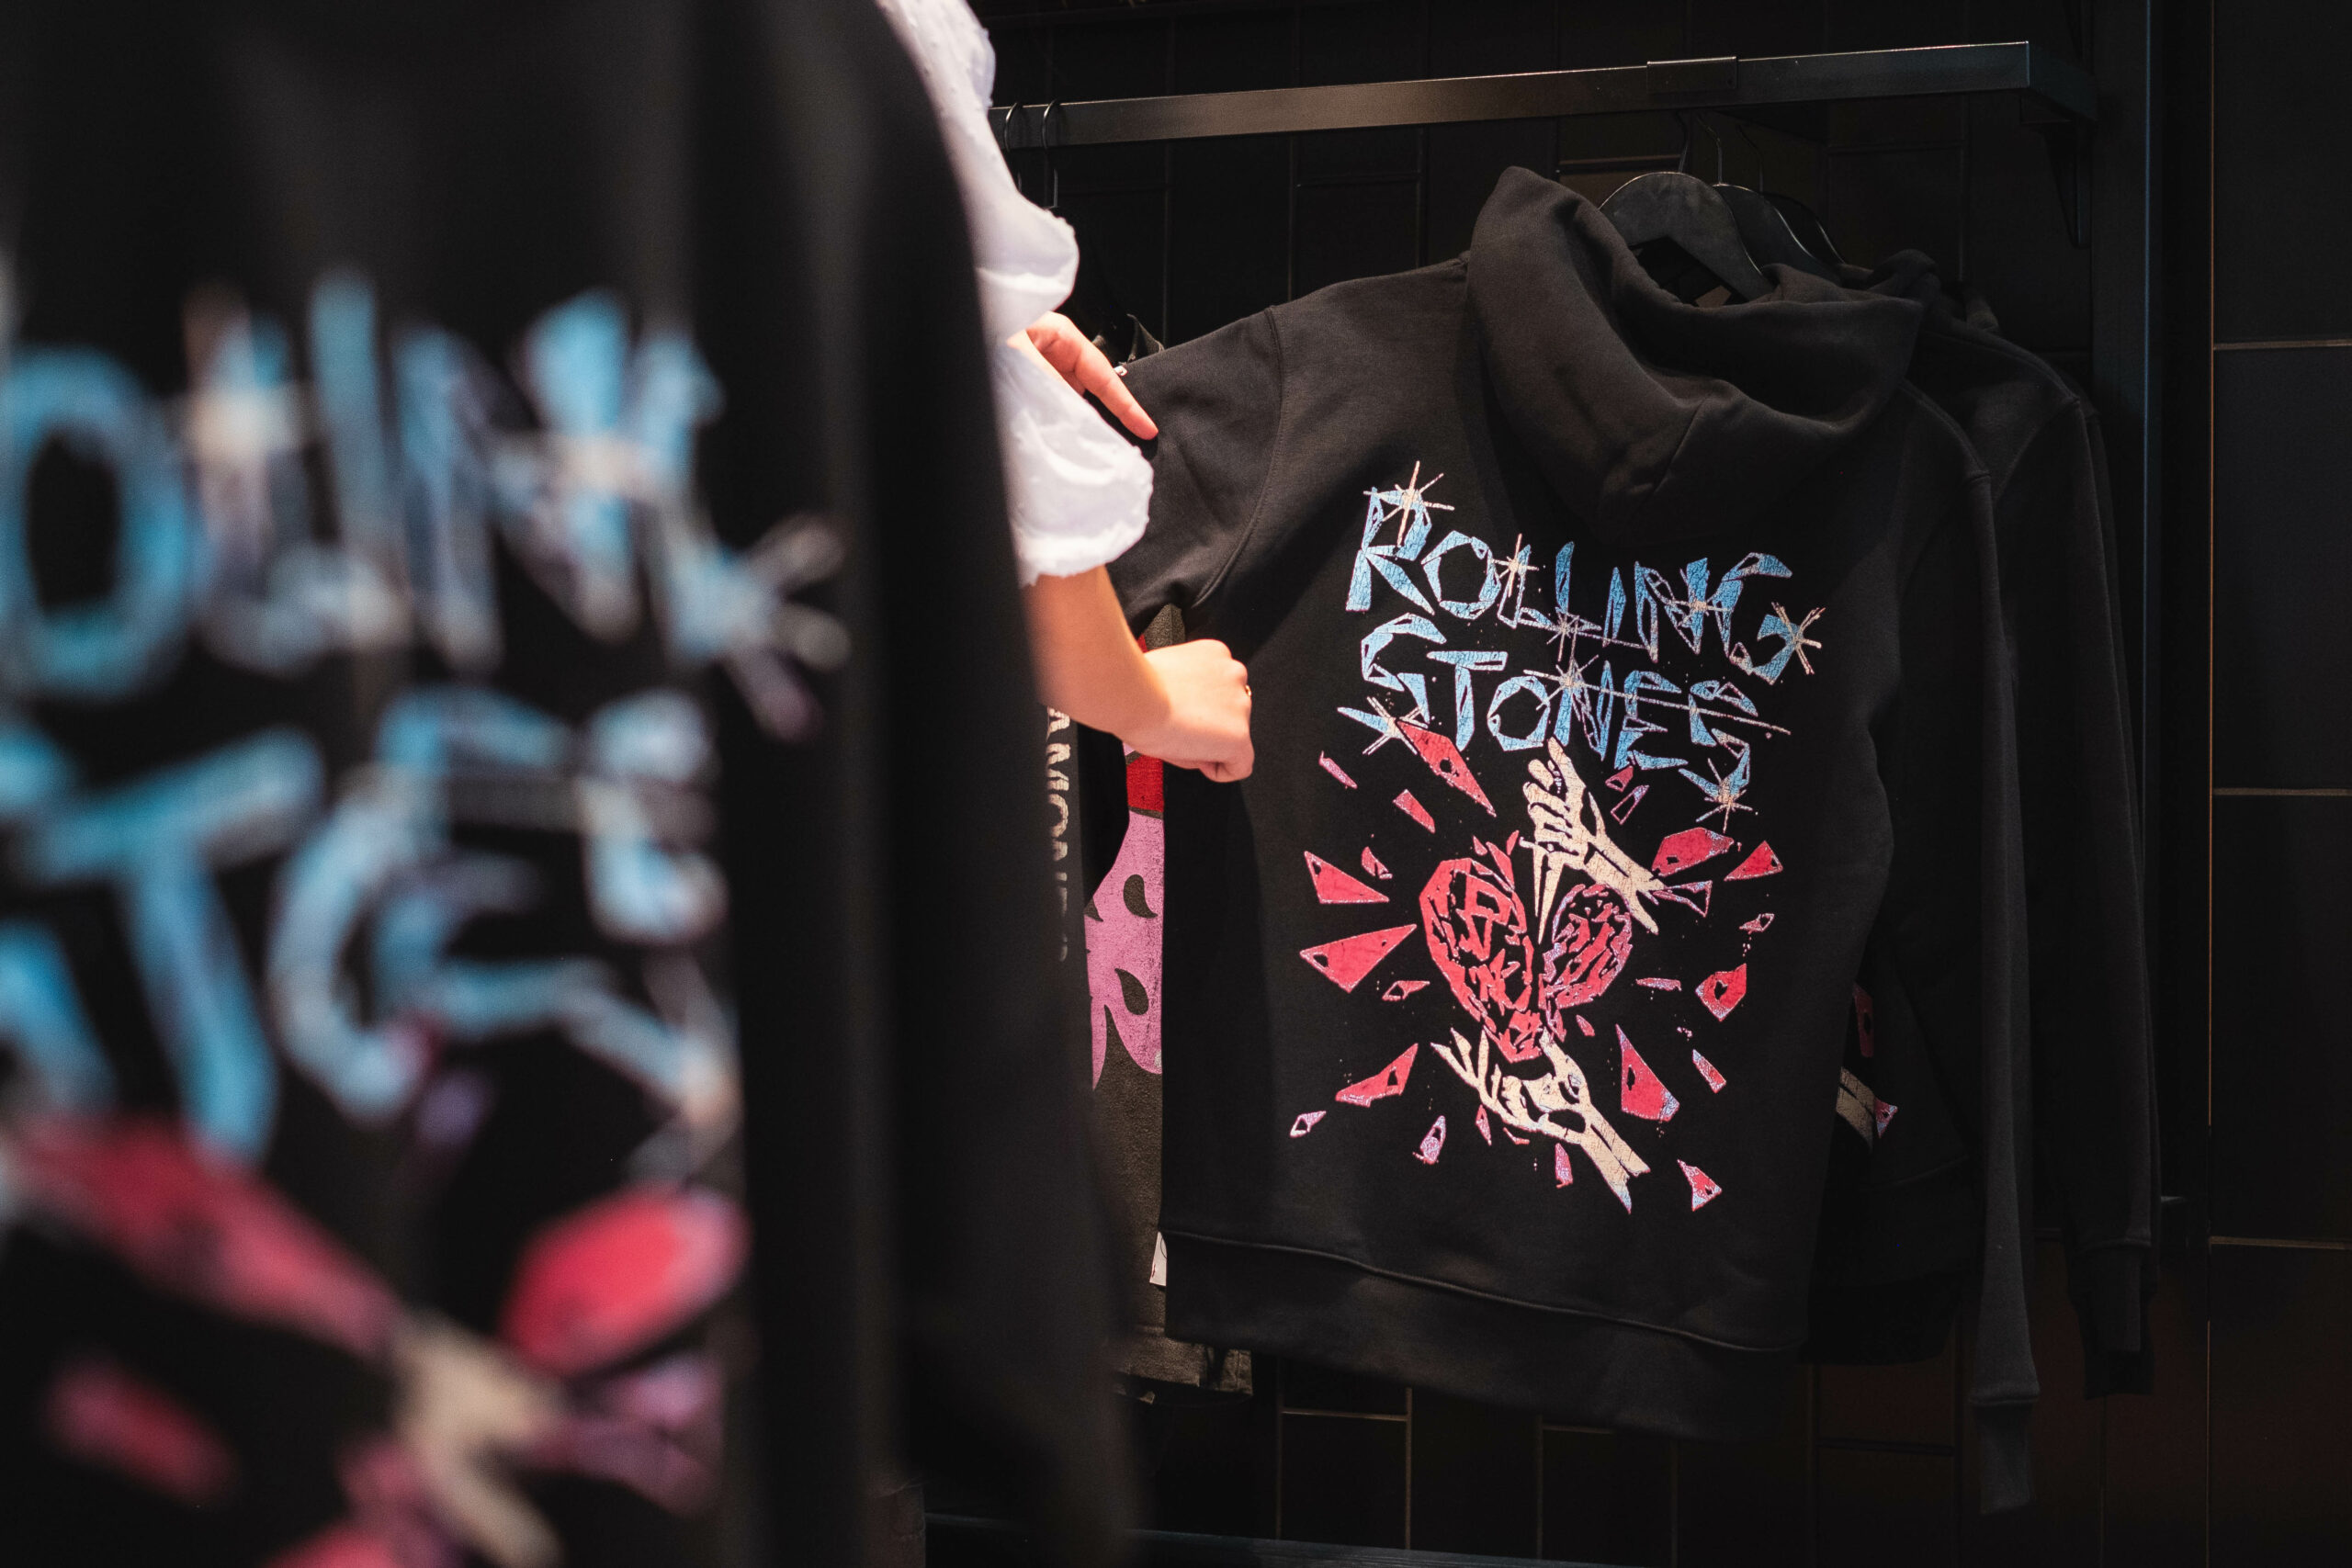 In Pictures: The Rolling Stones brings 'Hackney Diamonds' merch to